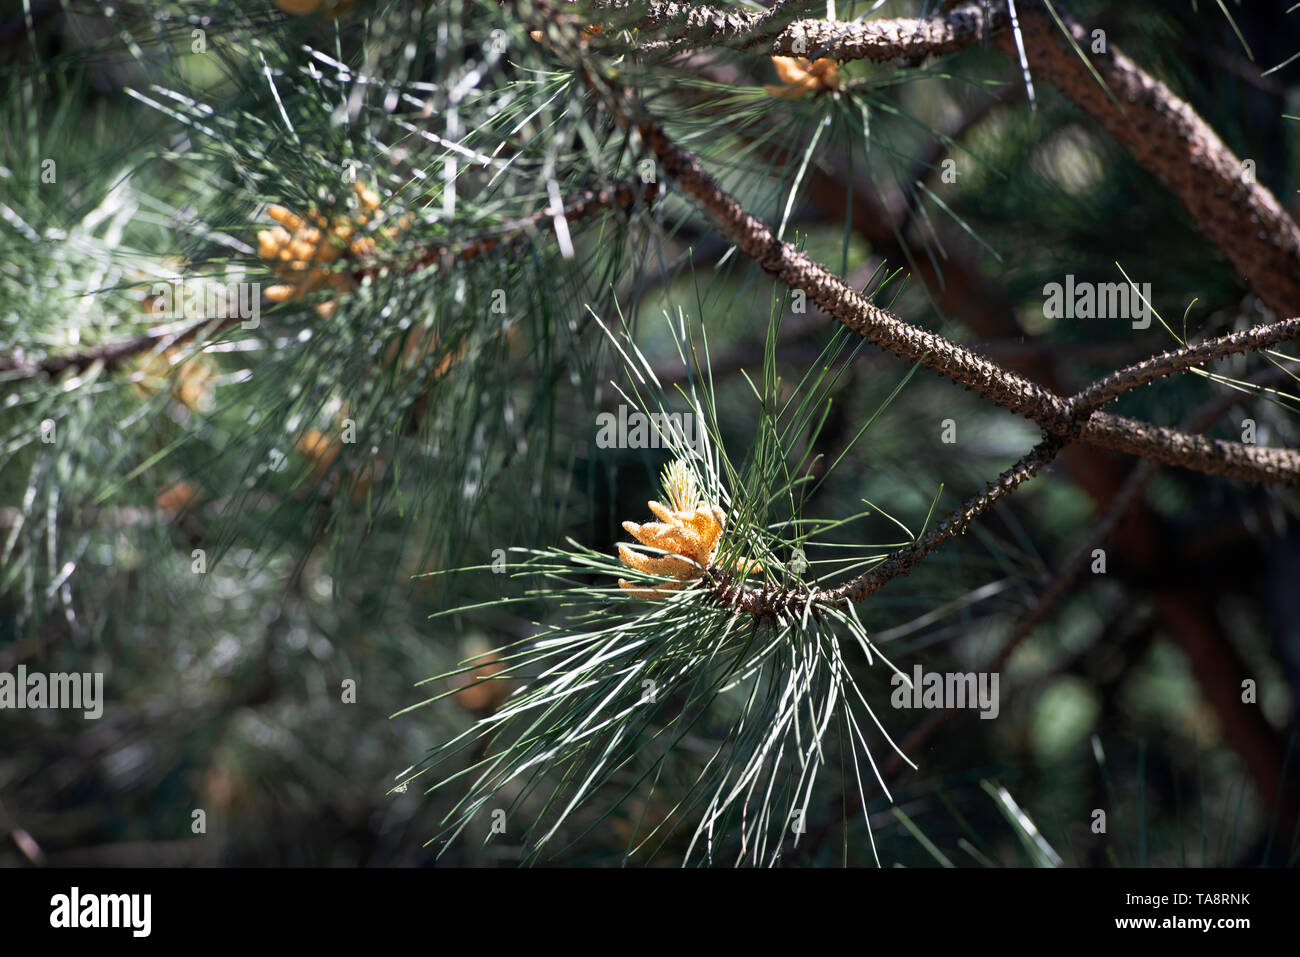 a pine tree in a spring Stock Photo